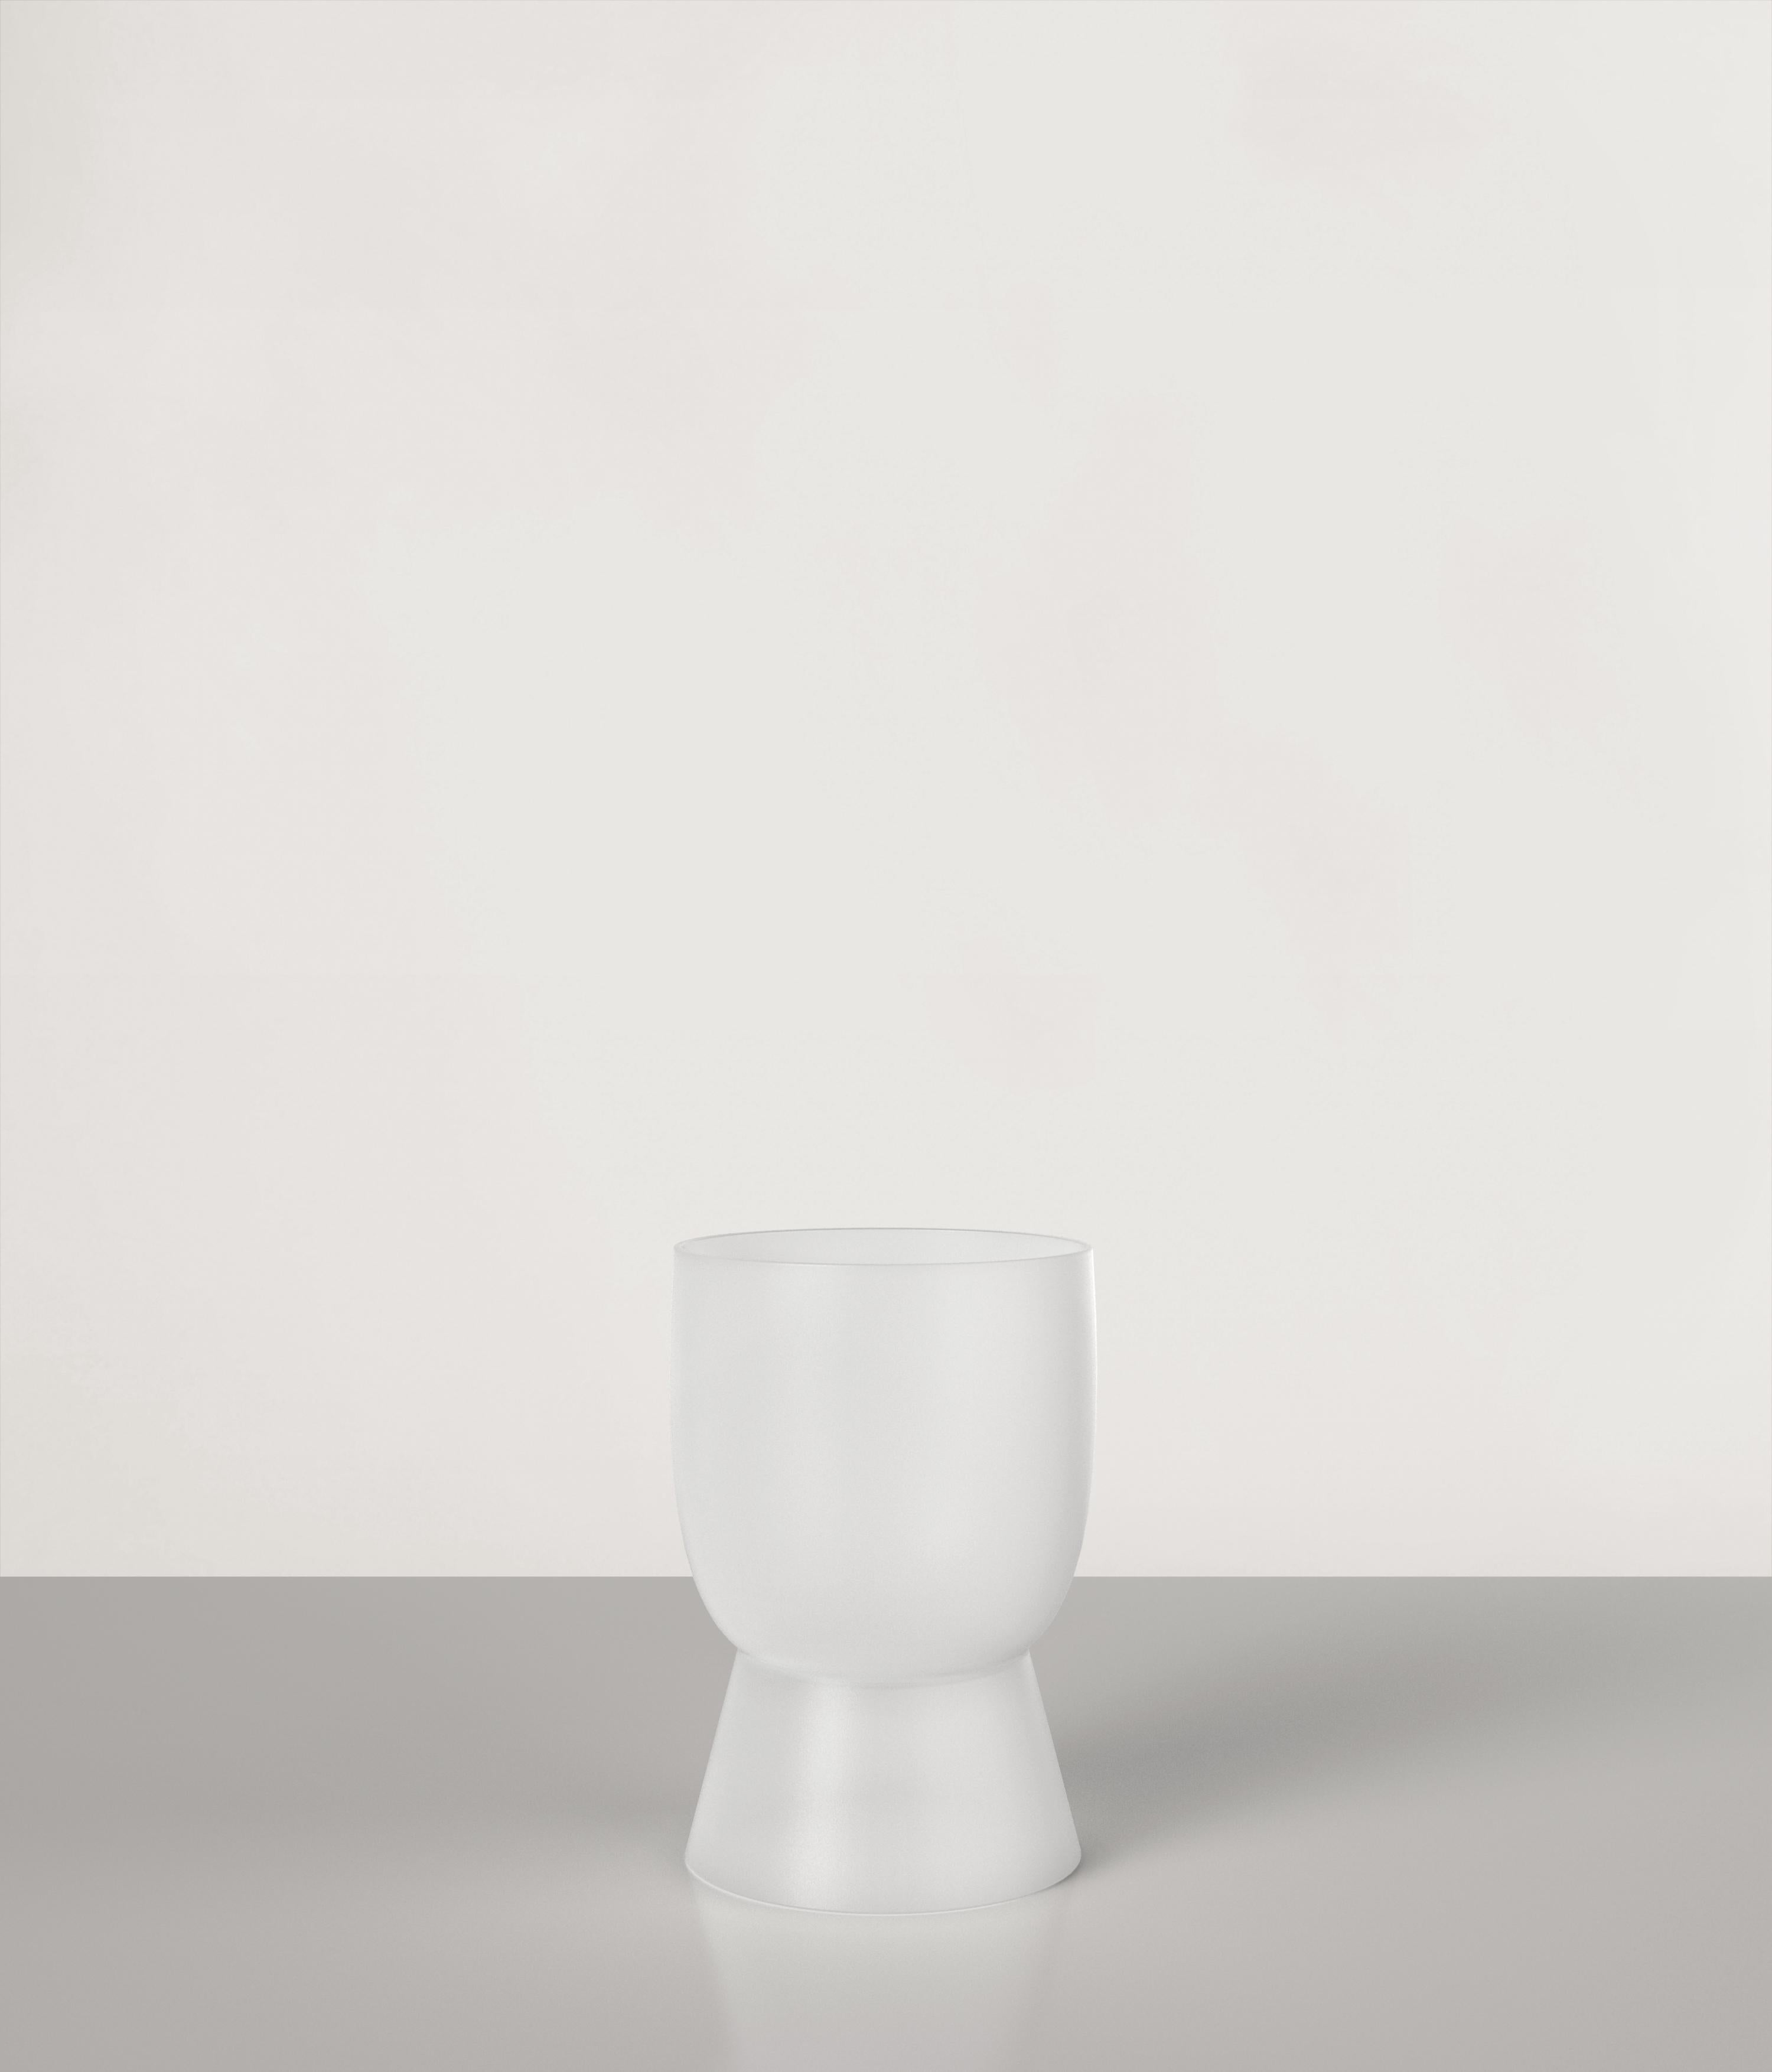 Pigalle V1 glass by Edizione Limitata
Limited Edition of 1000 pieces. Signed and numbered.
Dimensions: D 8.5 x H 11.7 cm
Materials: Sanded glass

Pigalle is a series of 21st century glasses made by Italian artisans in blown sanded glass. The piece